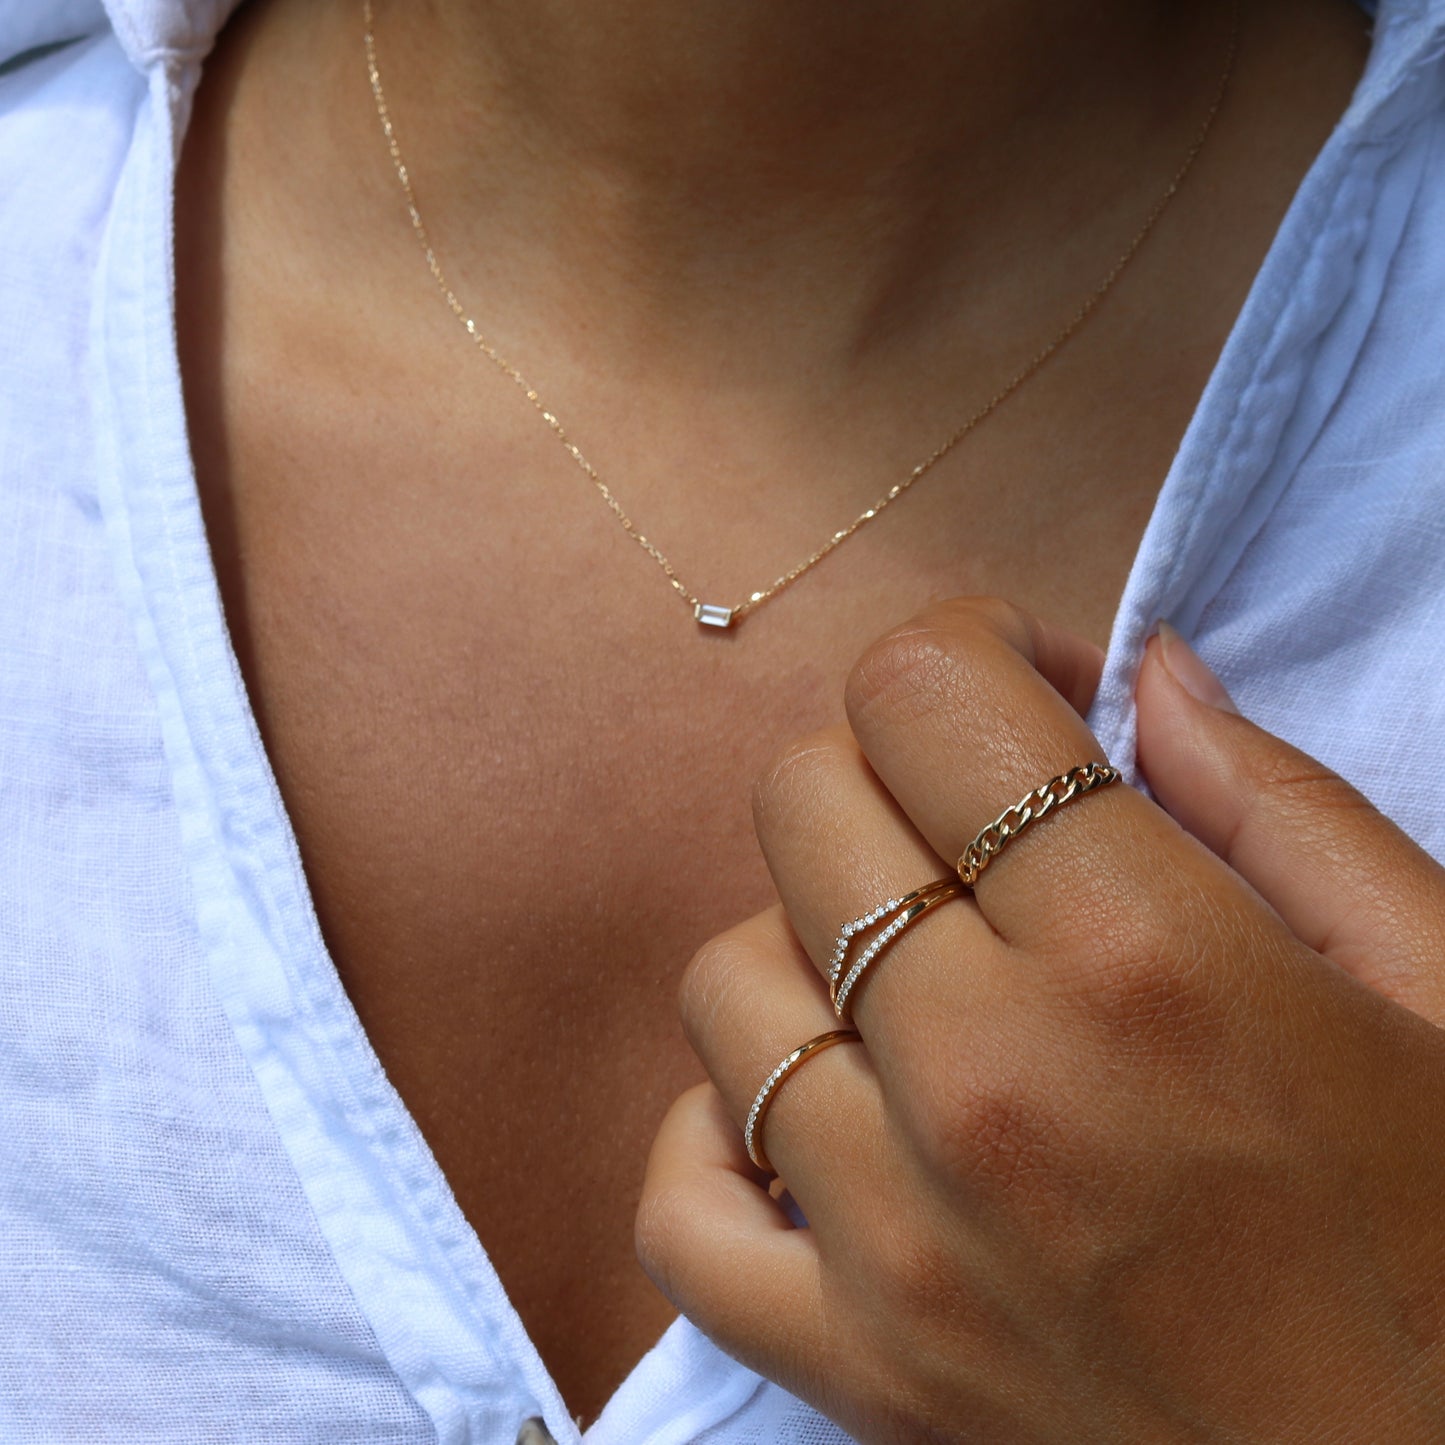  collarbone necklace, clavicle necklace, clavicle pendant, gold dainty minimal necklace, aesthetic necklace white gold, white gold necklace, wedding jewelry,